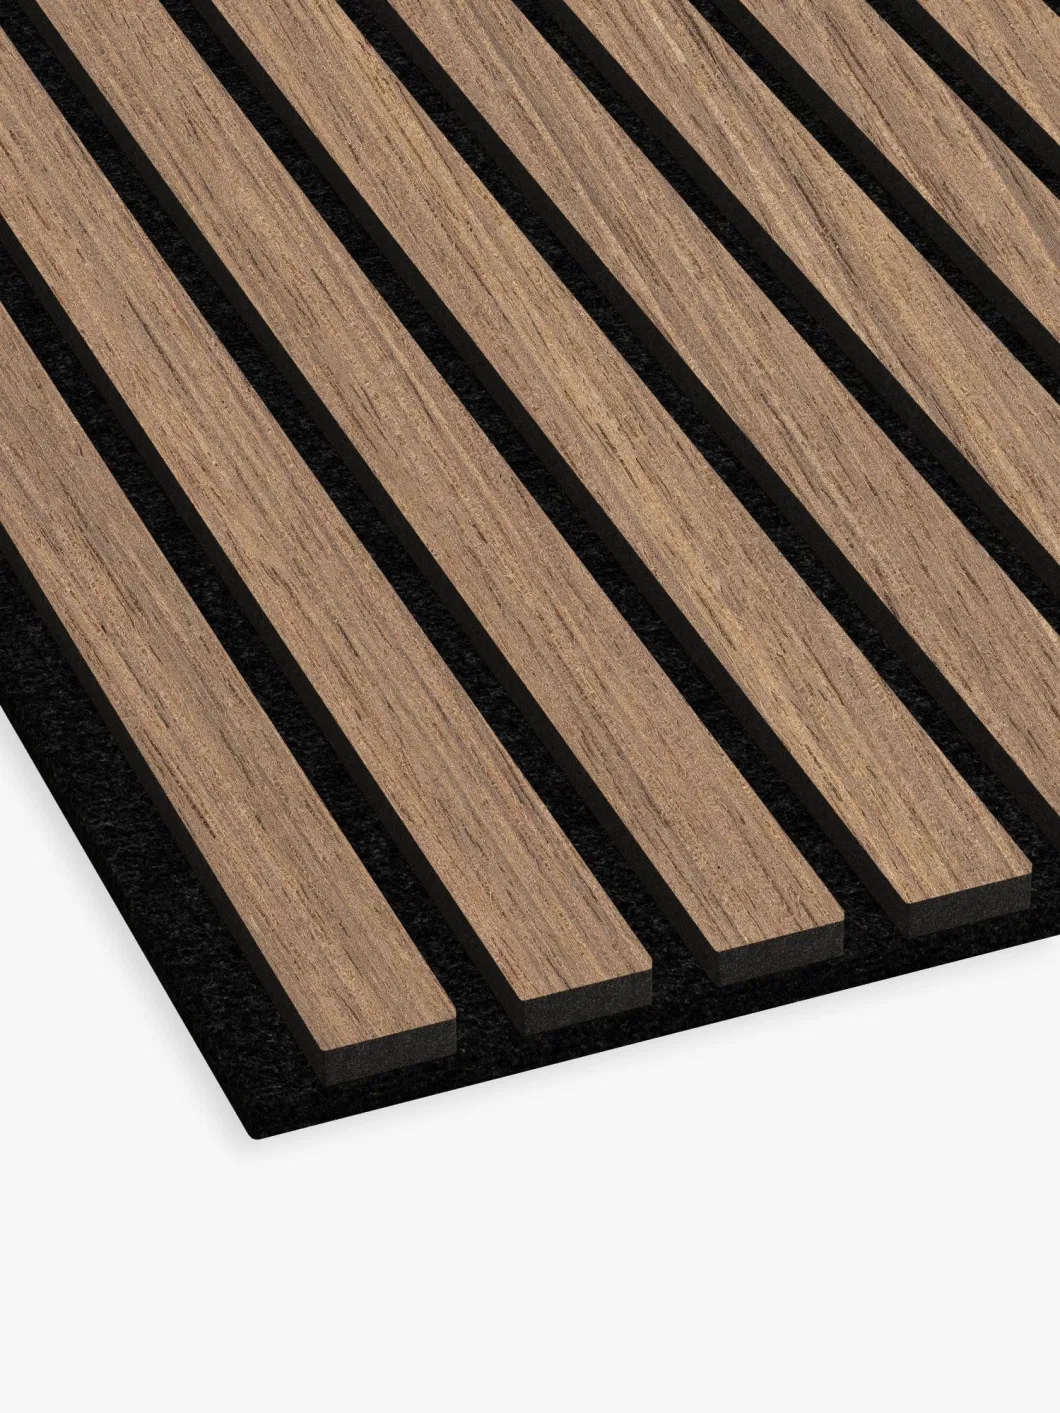 MDF and Compact Wooden Strip Sound-Absorbing Board with Below Polyester Acoustic Panels for Interior Decoration Soundproof Use